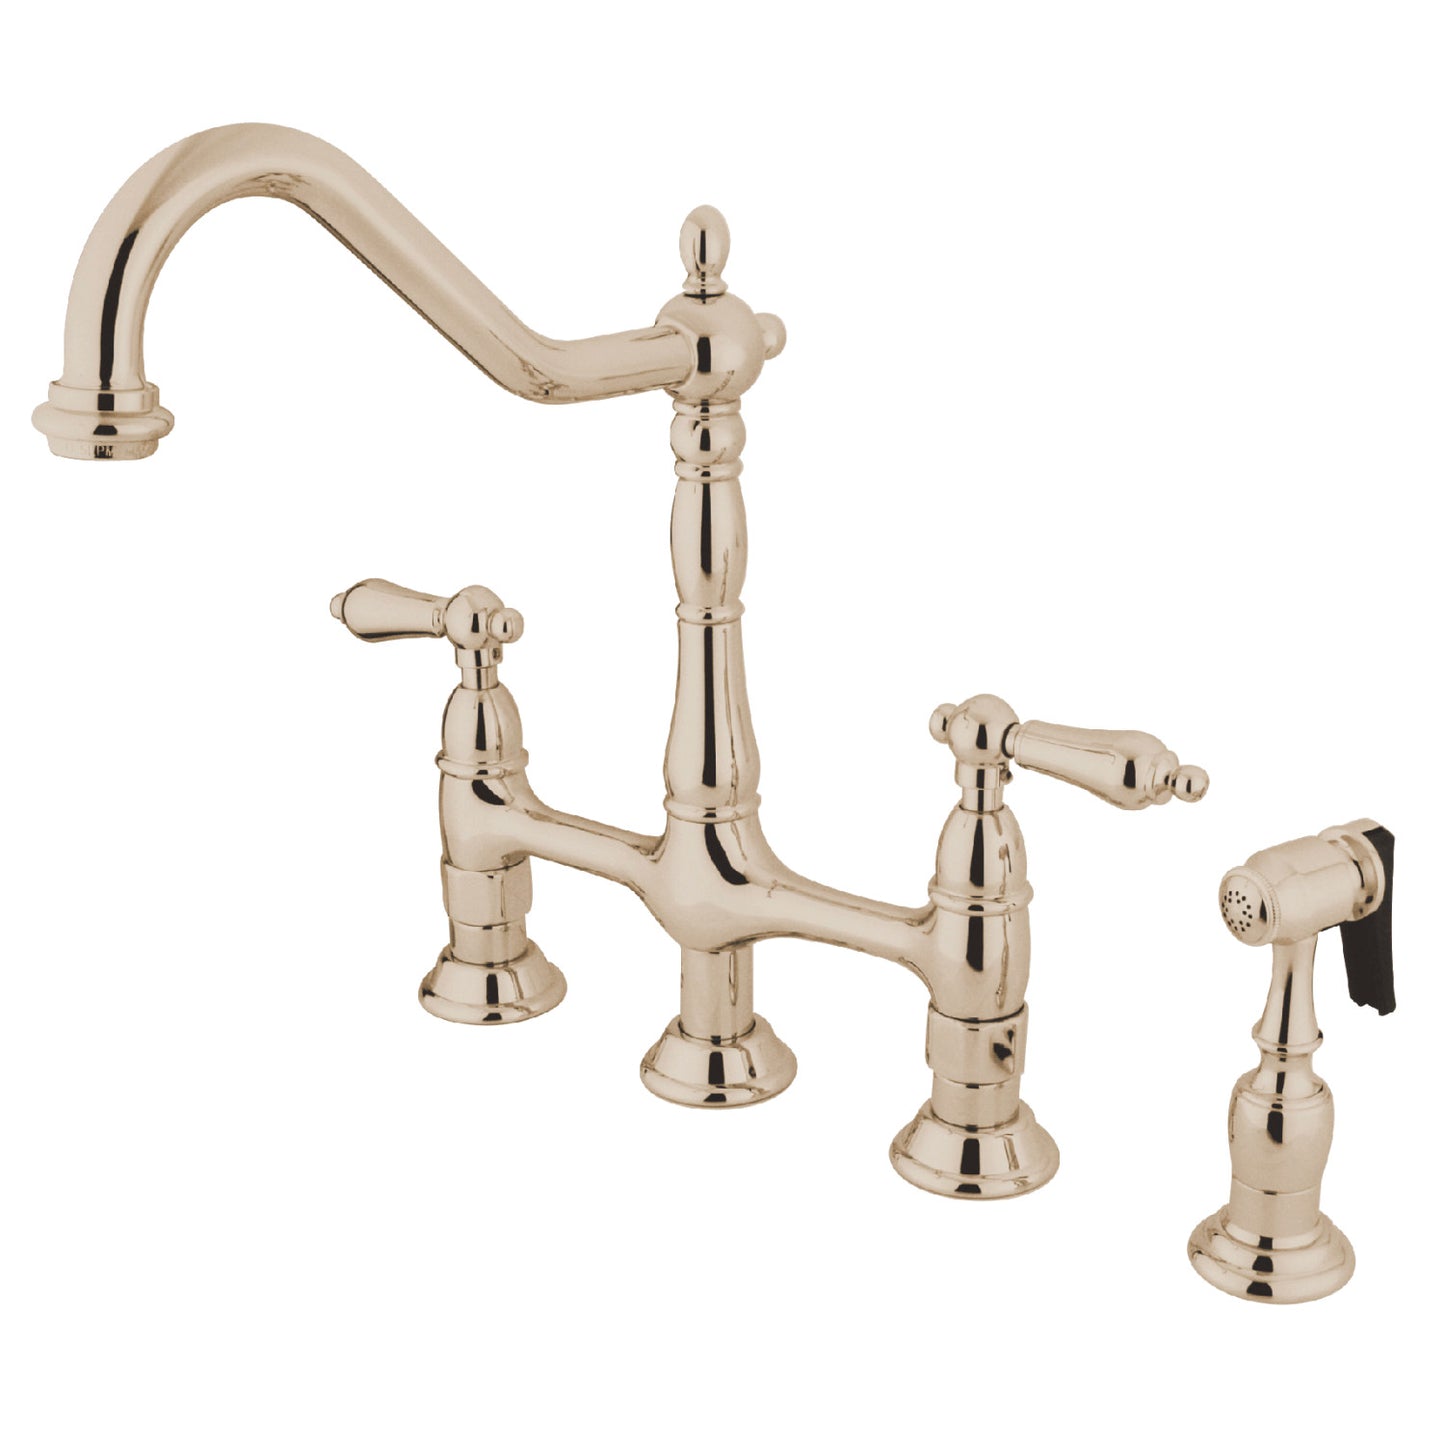 Lever Handles Bridge Kitchen Faucet with Side Spray